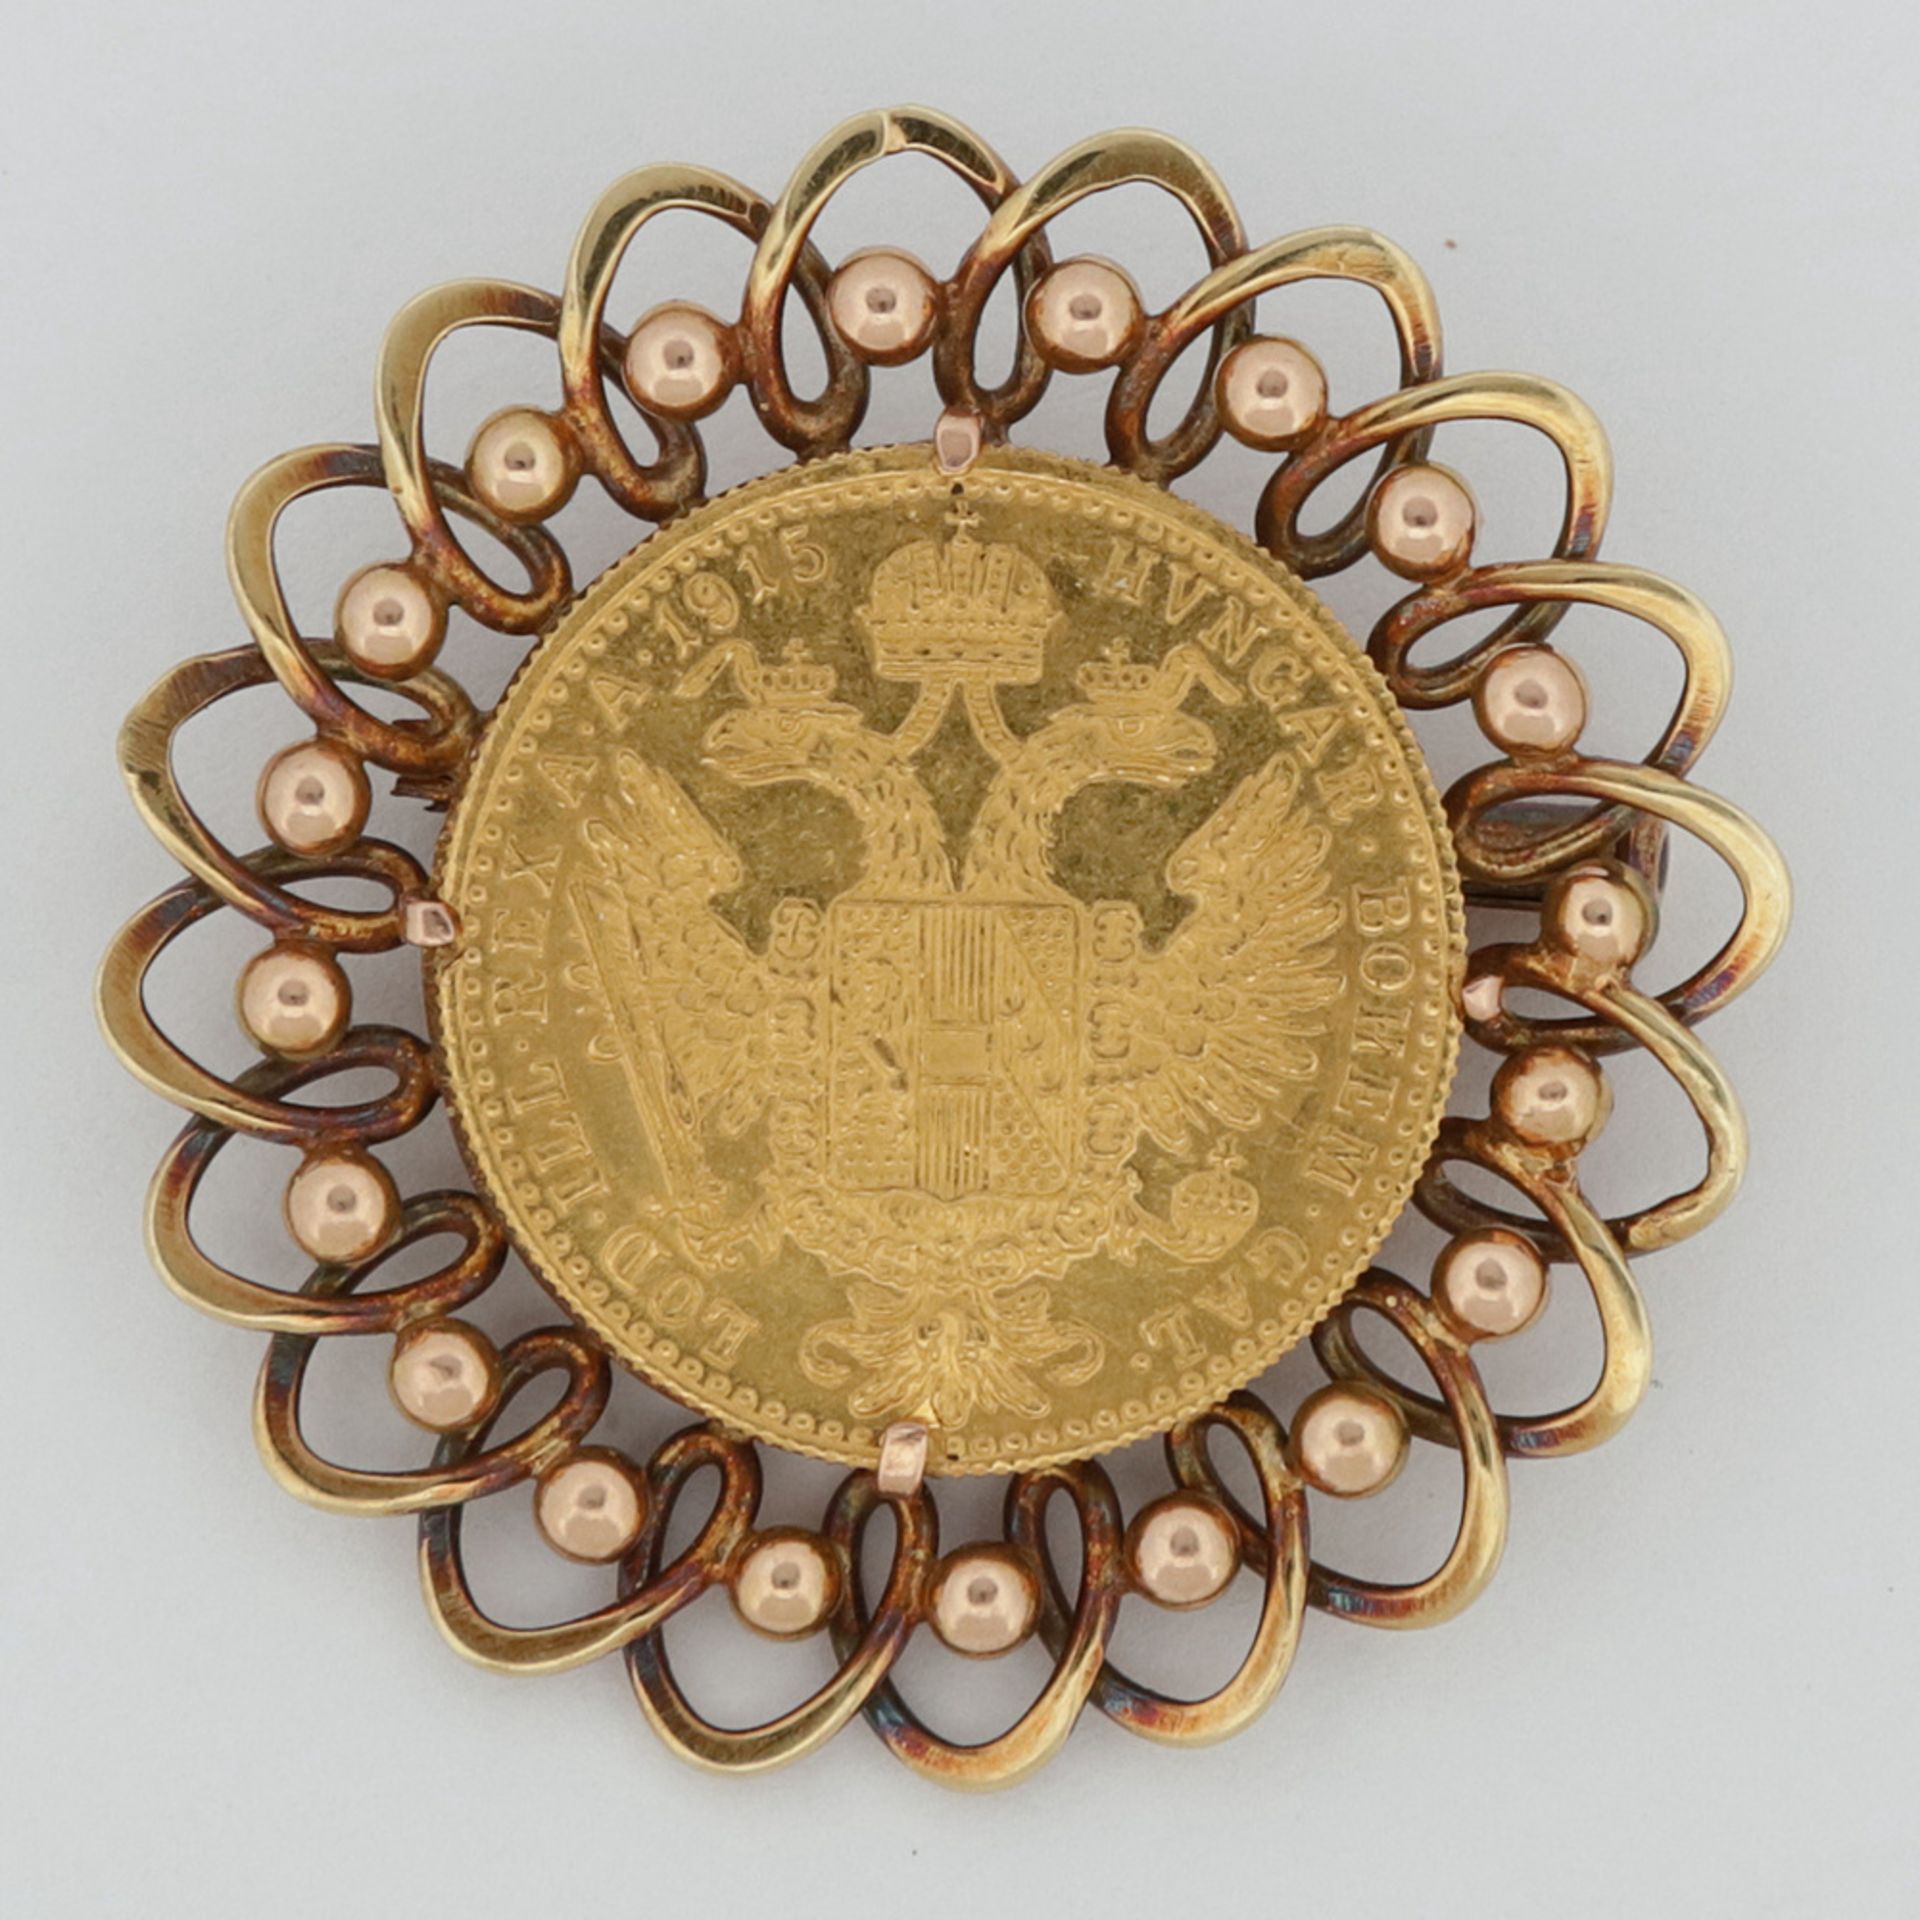 Brooch with 1 Dukaten gold coin